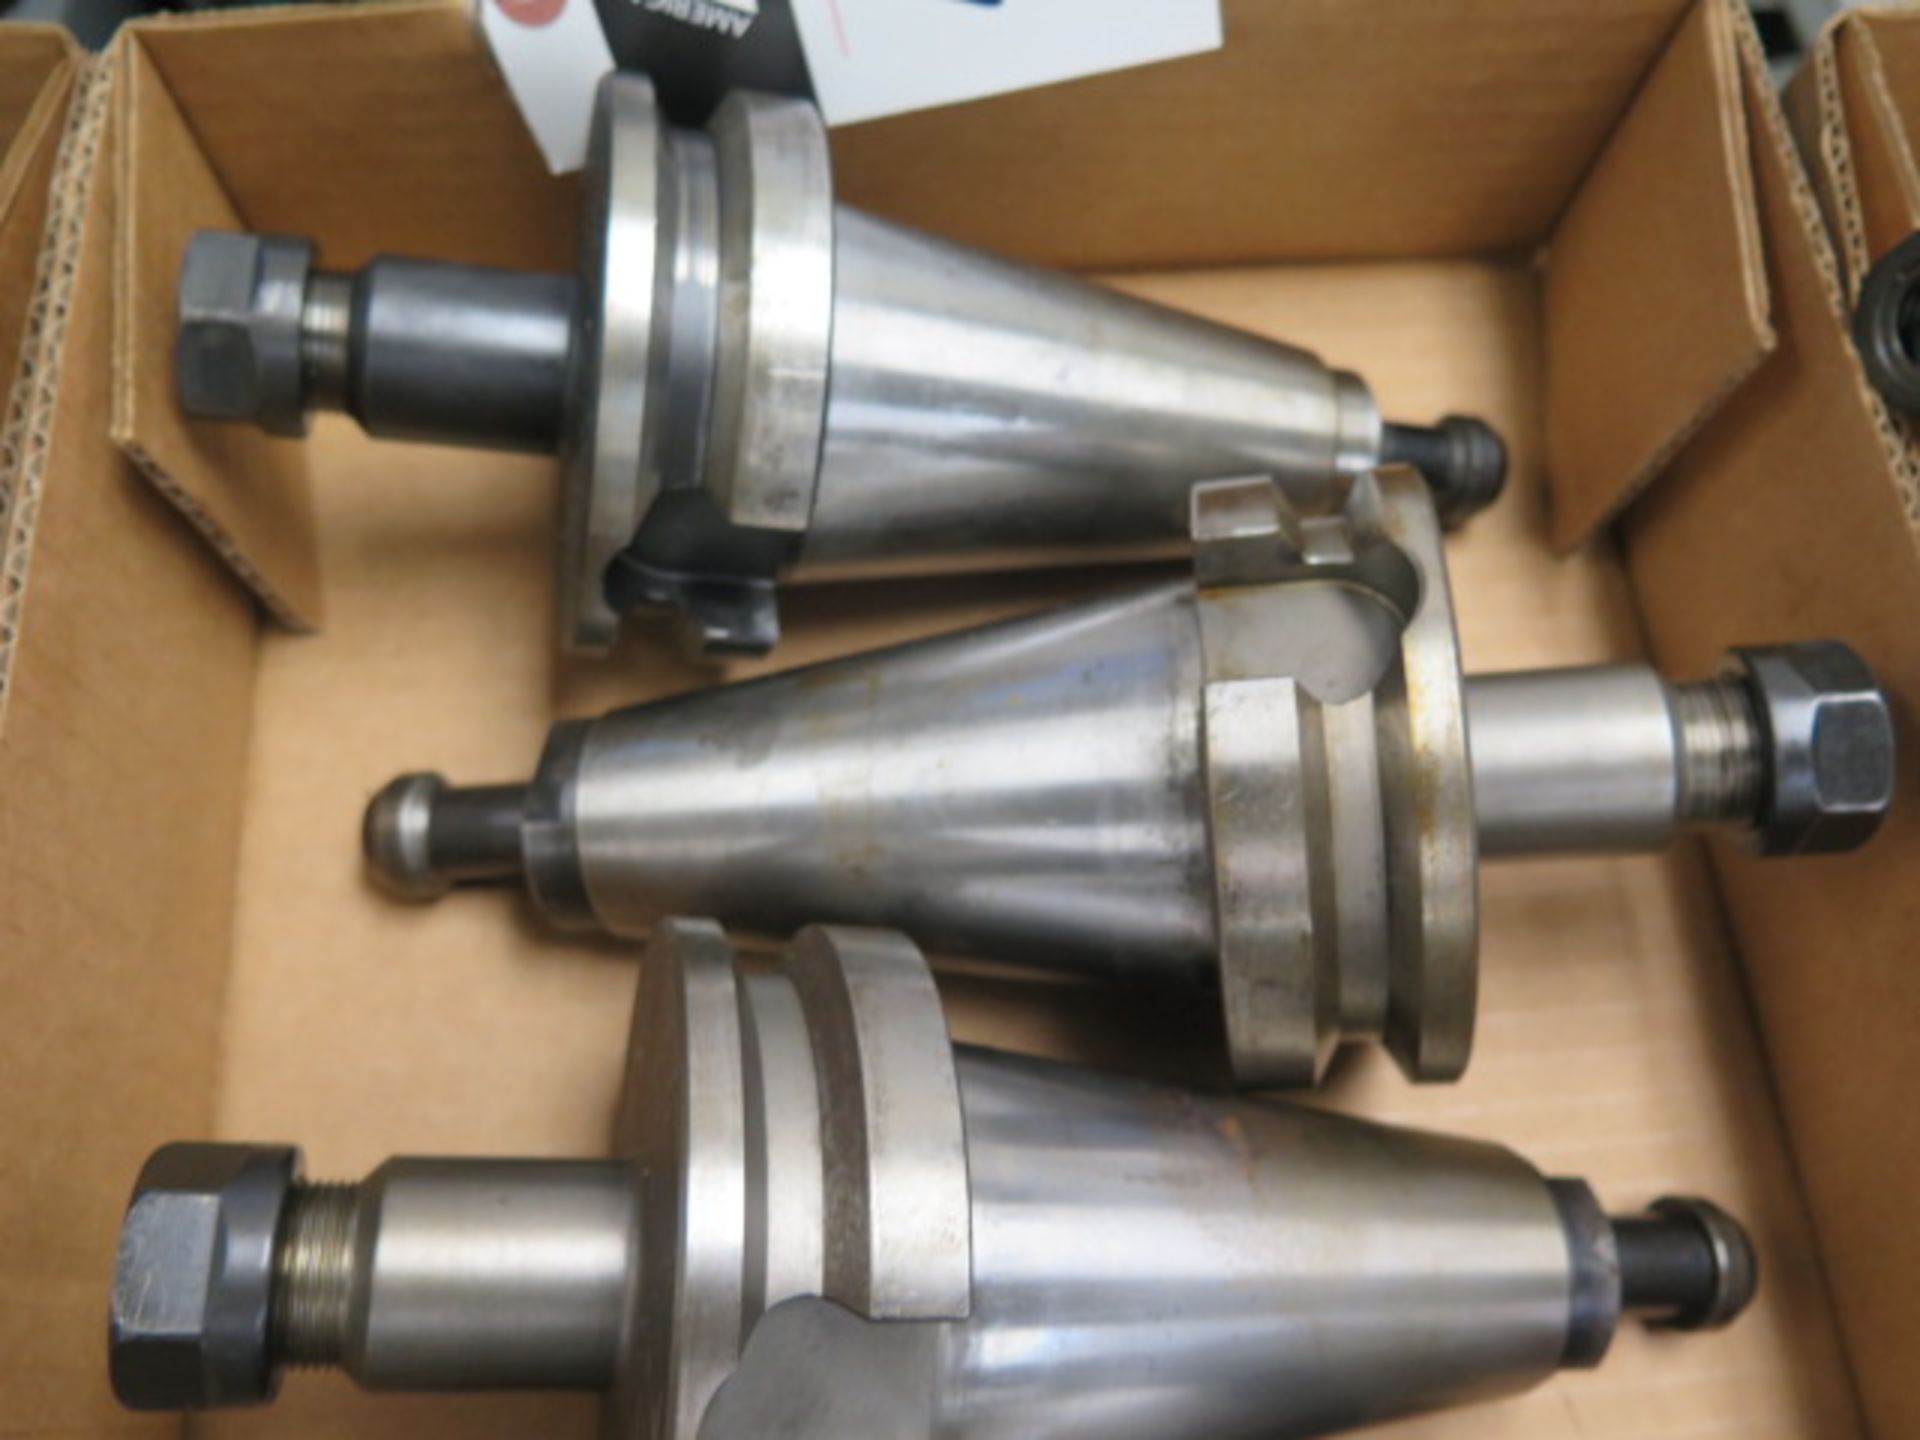 BT-50 Taper ER20 Collet Chucks (5) (SOLD AS-IS - NO WARRANTY) (Located @ 2229 Ringwood Ave. San Jose - Image 3 of 7